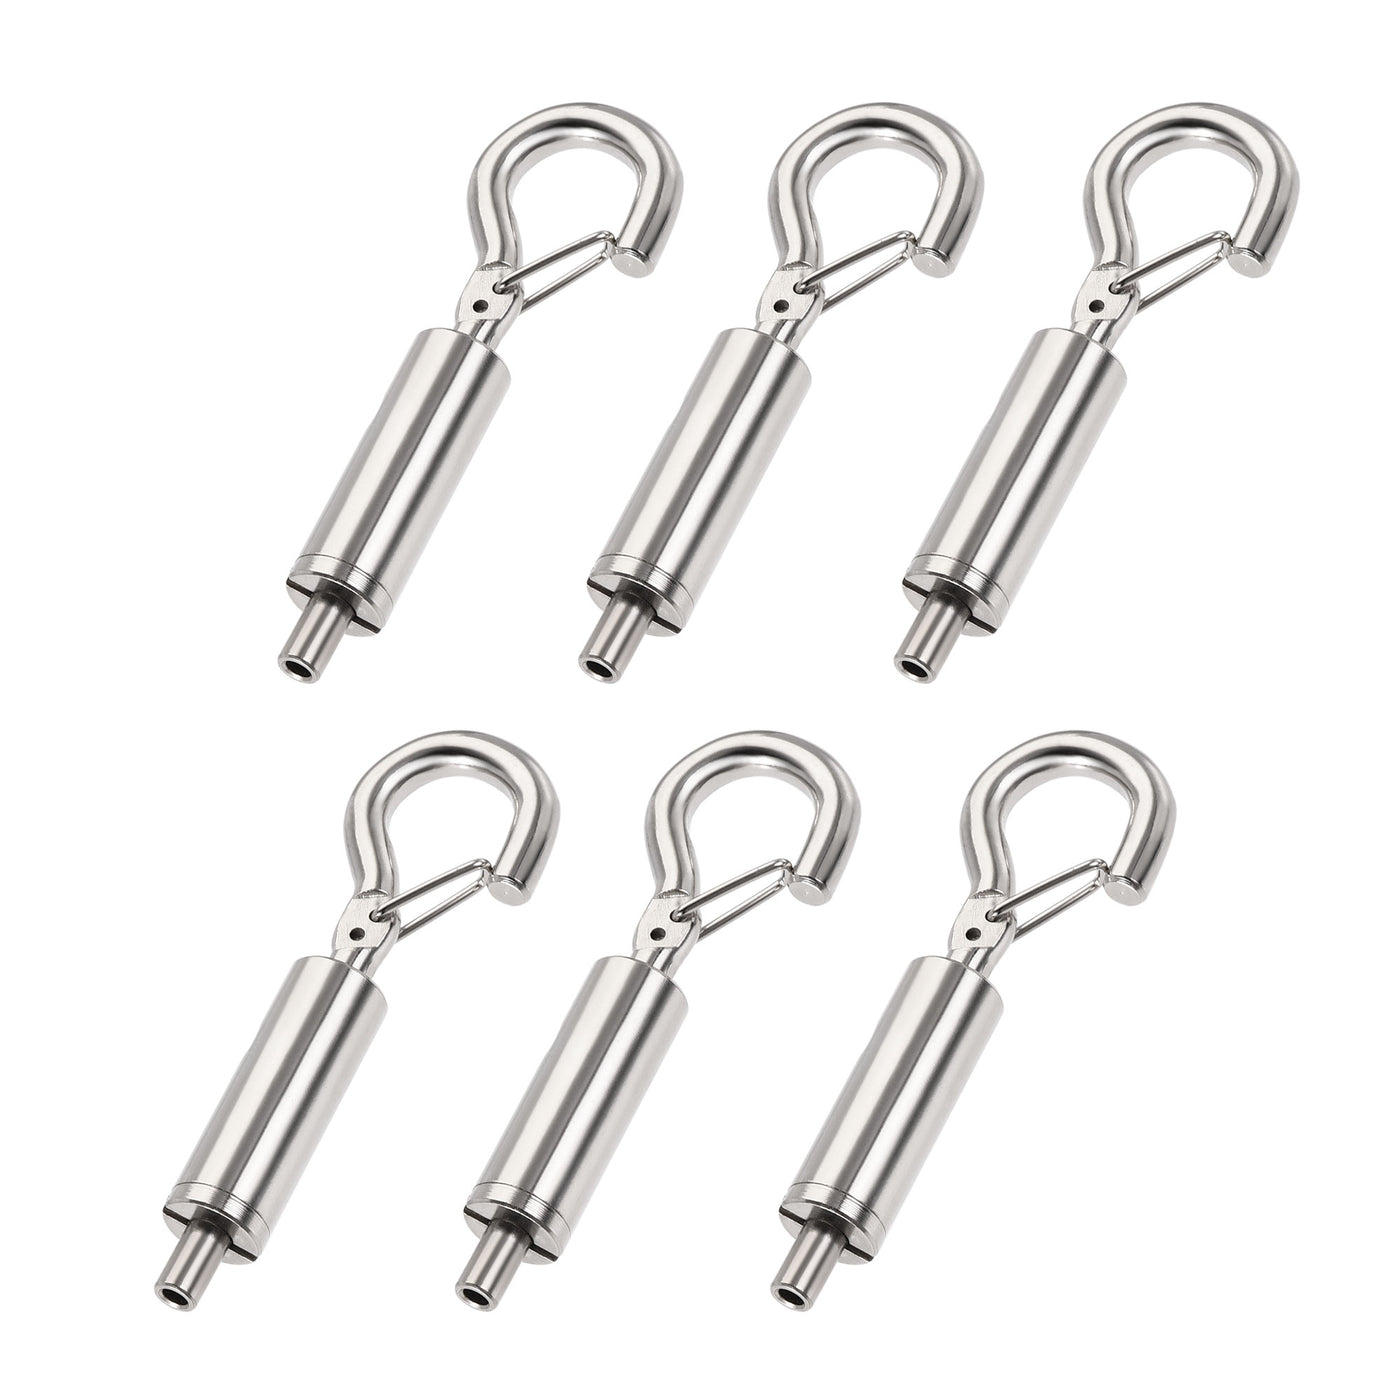 uxcell Uxcell Picture Hanging Wire Hook, 6pcs 5mm Open Adjustable Copper Hooks for Home Picture Art Gallery Picture Display Kit